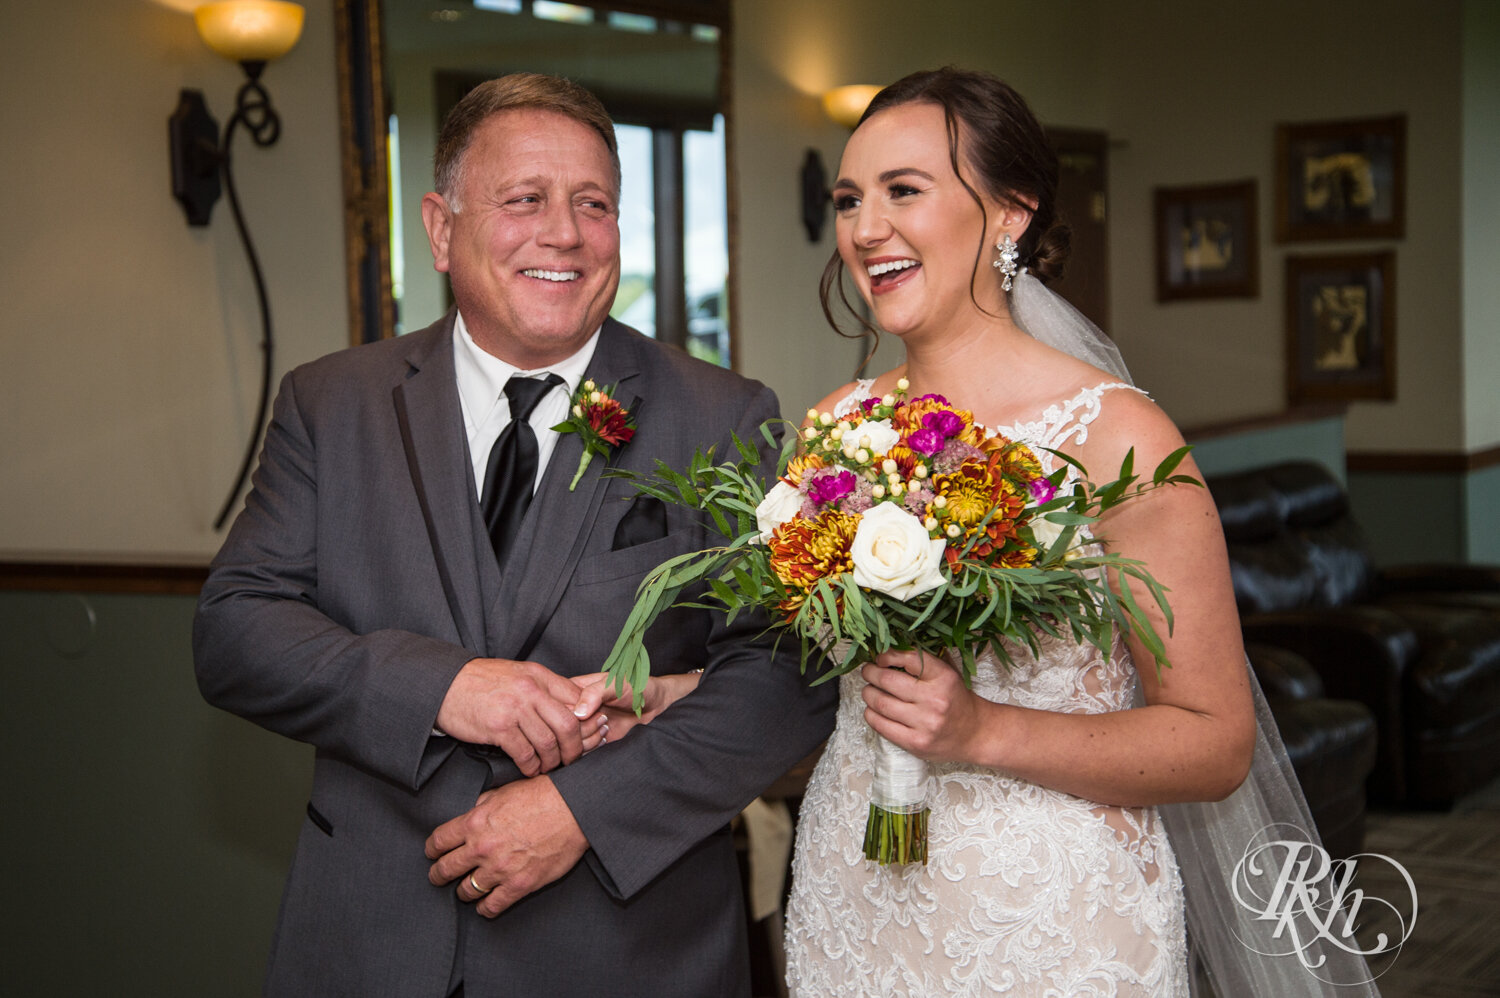 Bride and father laugh together before wedding at The Wilds Golf Club in Prior Lake, Minnesota.